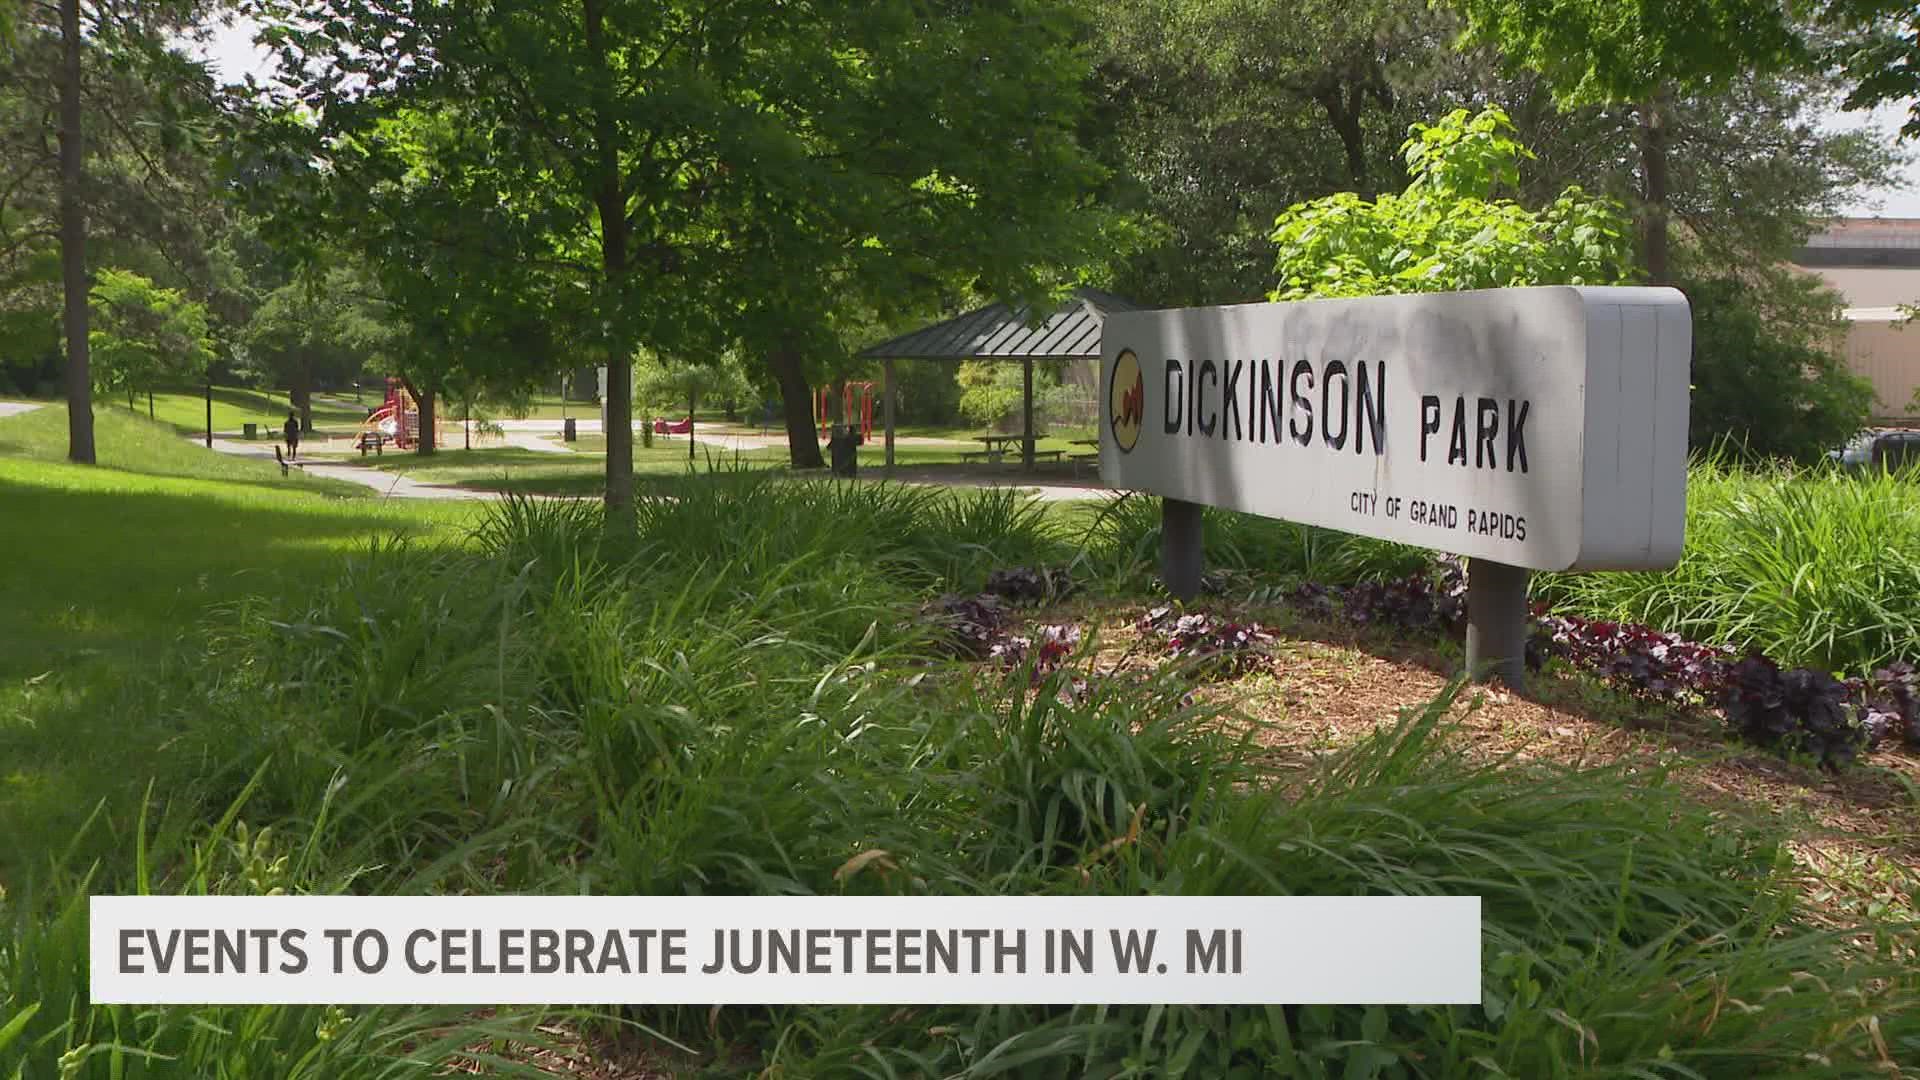 June 19 is Juneteenth, a holiday that commemorates the emancipation of enslaved African Americans.